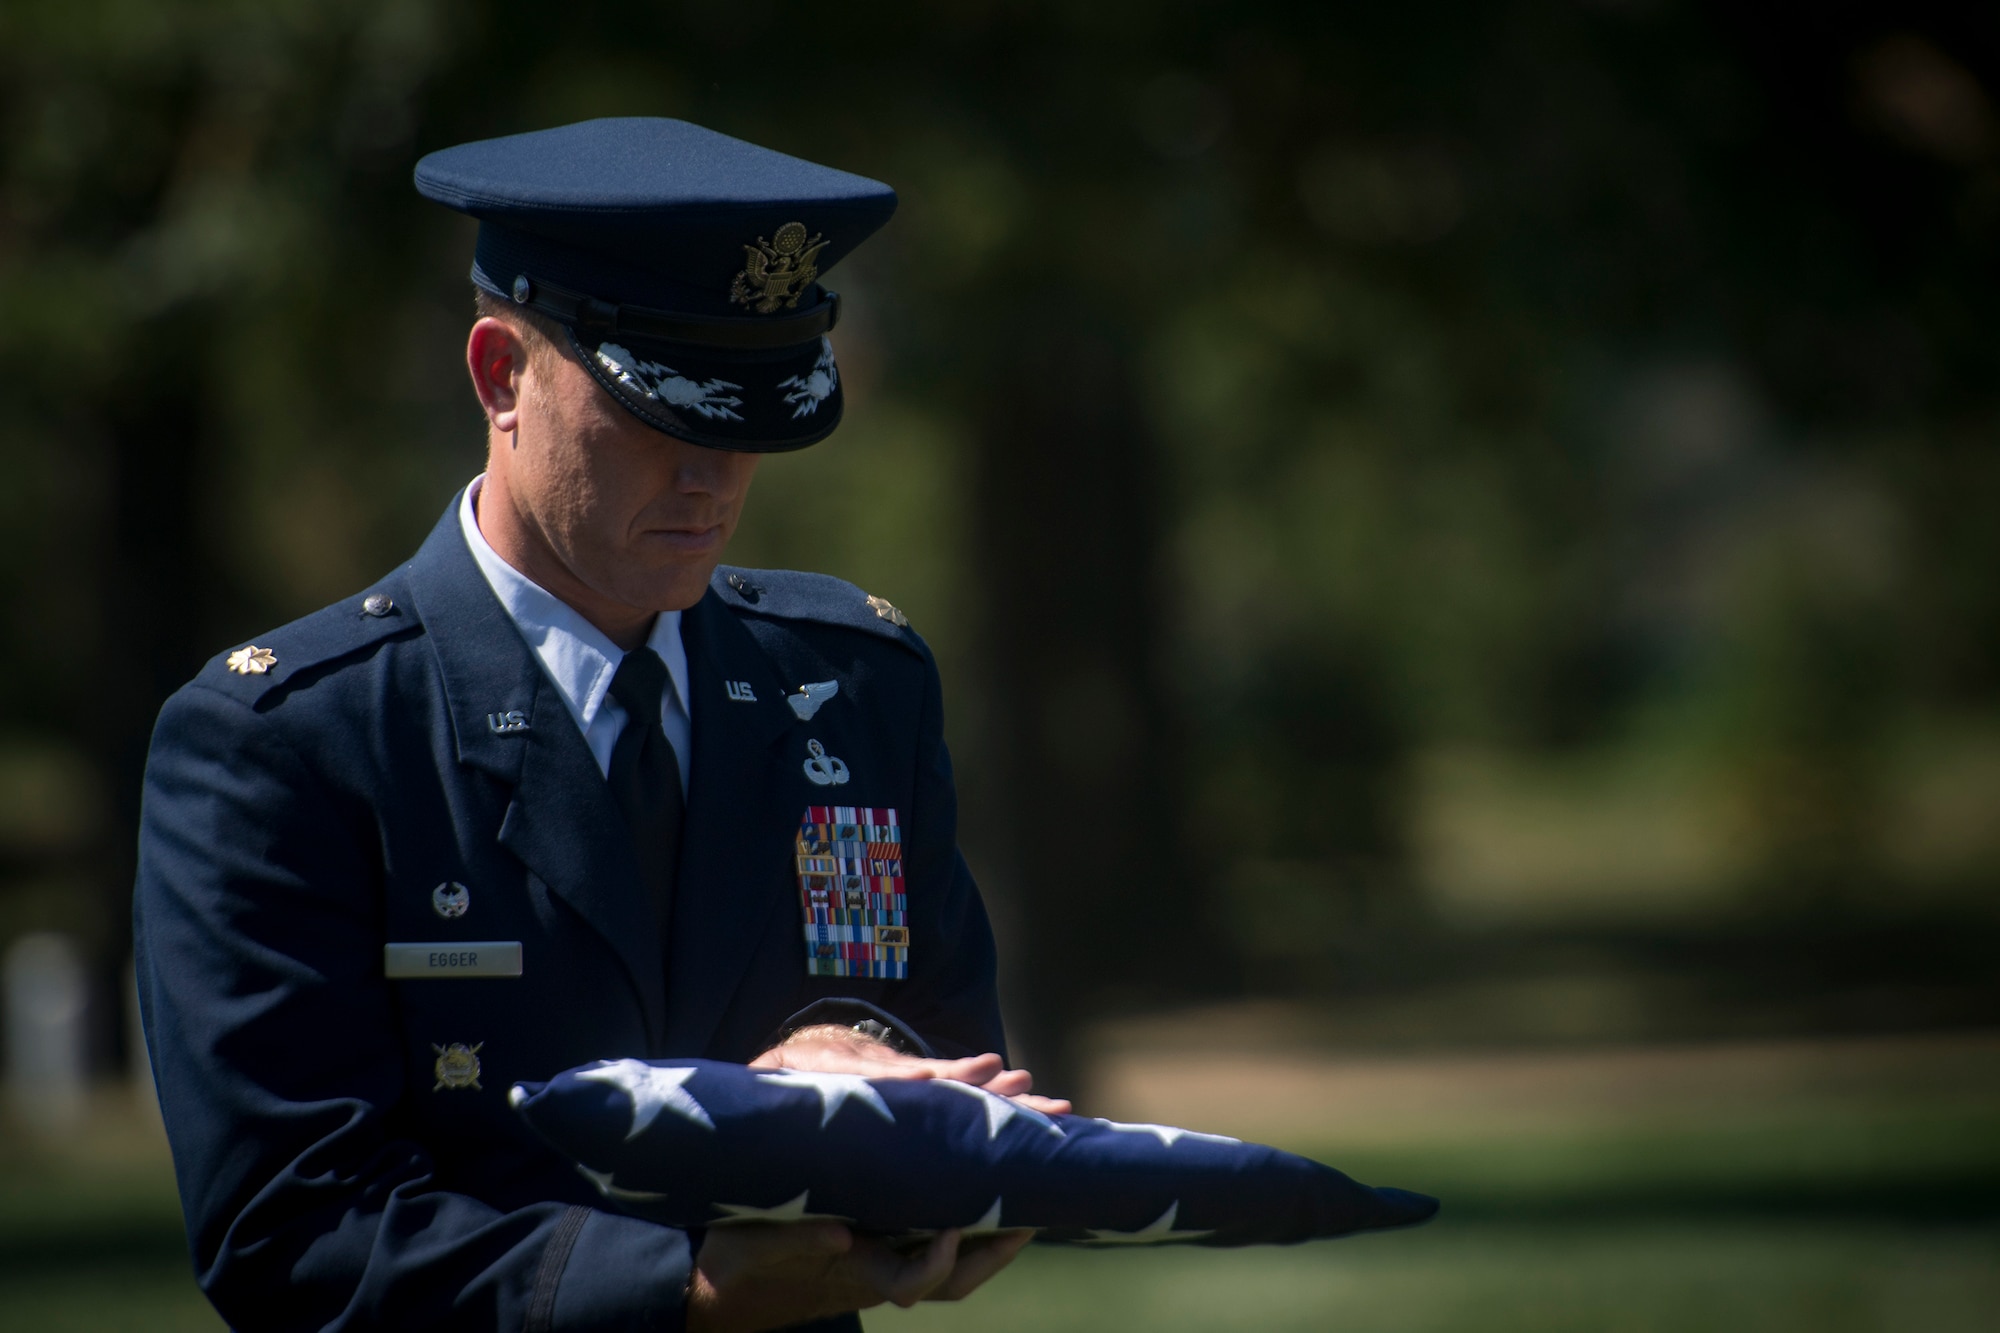 Maj. Jason Egger, 38th Rescue Squadron commander, carries a folded flag during a funeral service for Capt. Mark Weber, July 9, 2018, at Arlington National Cemetery, Va. Weber, a 38th RQS combat rescue officer and Texas native, was killed in an HH-60G Pave Hawk crash in Anbar Province, Iraq, March 15. Friends, family, and Guardian Angel Airmen traveled from across the U.S. to attend the ceremony and pay their final respects. (U.S. Air Force photo by Staff Sgt. Ryan Callaghan)